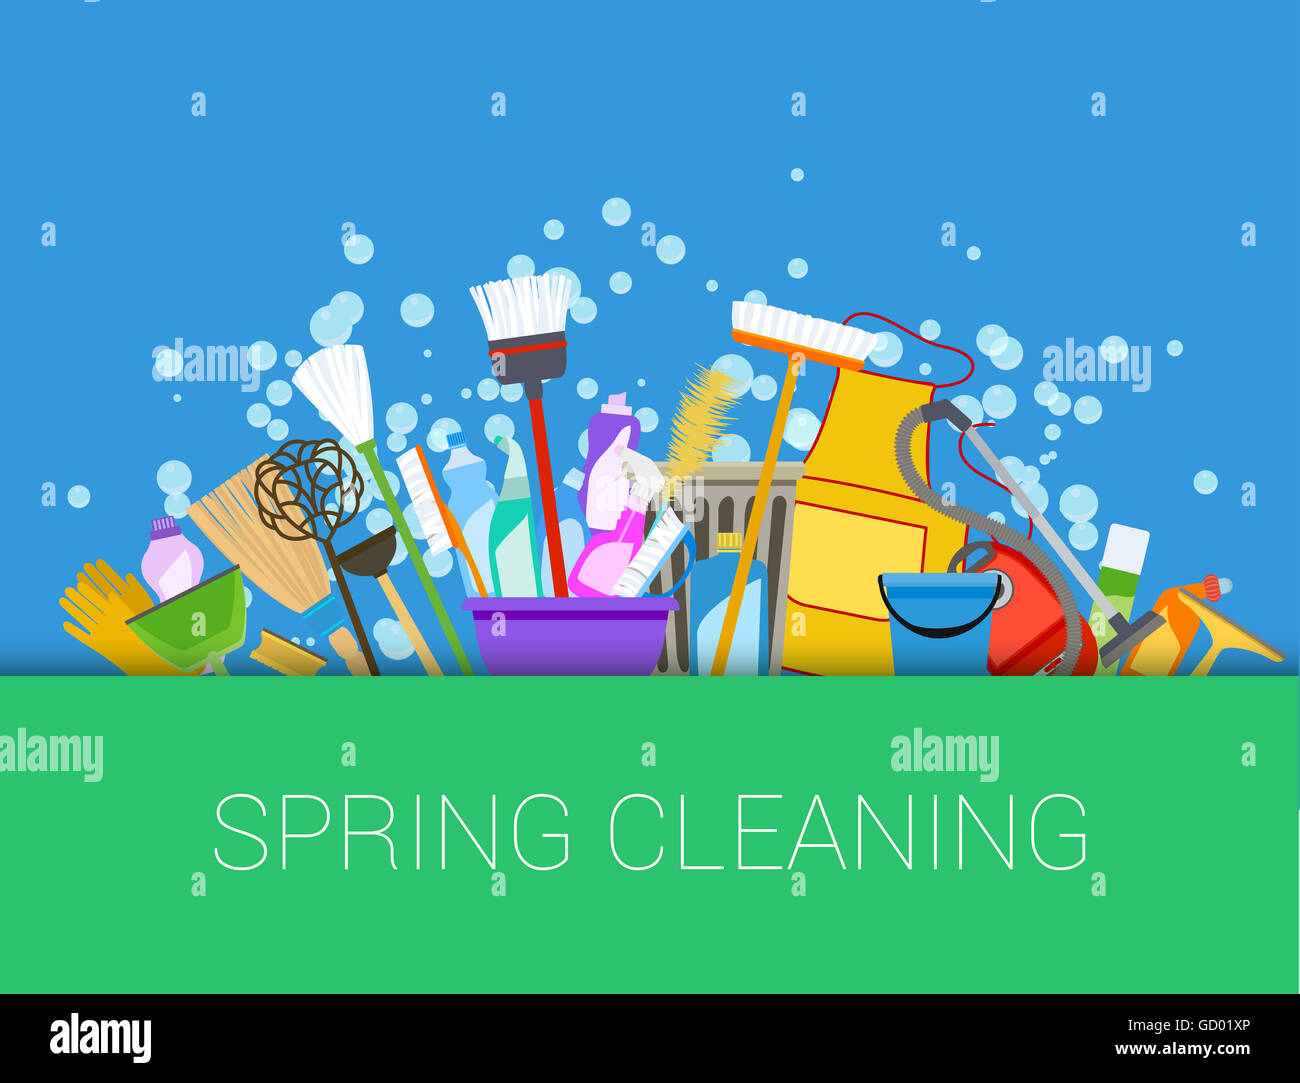 Spring cleaning background. Set of cleaning supplies. Tools of housecleaning Stock Photo